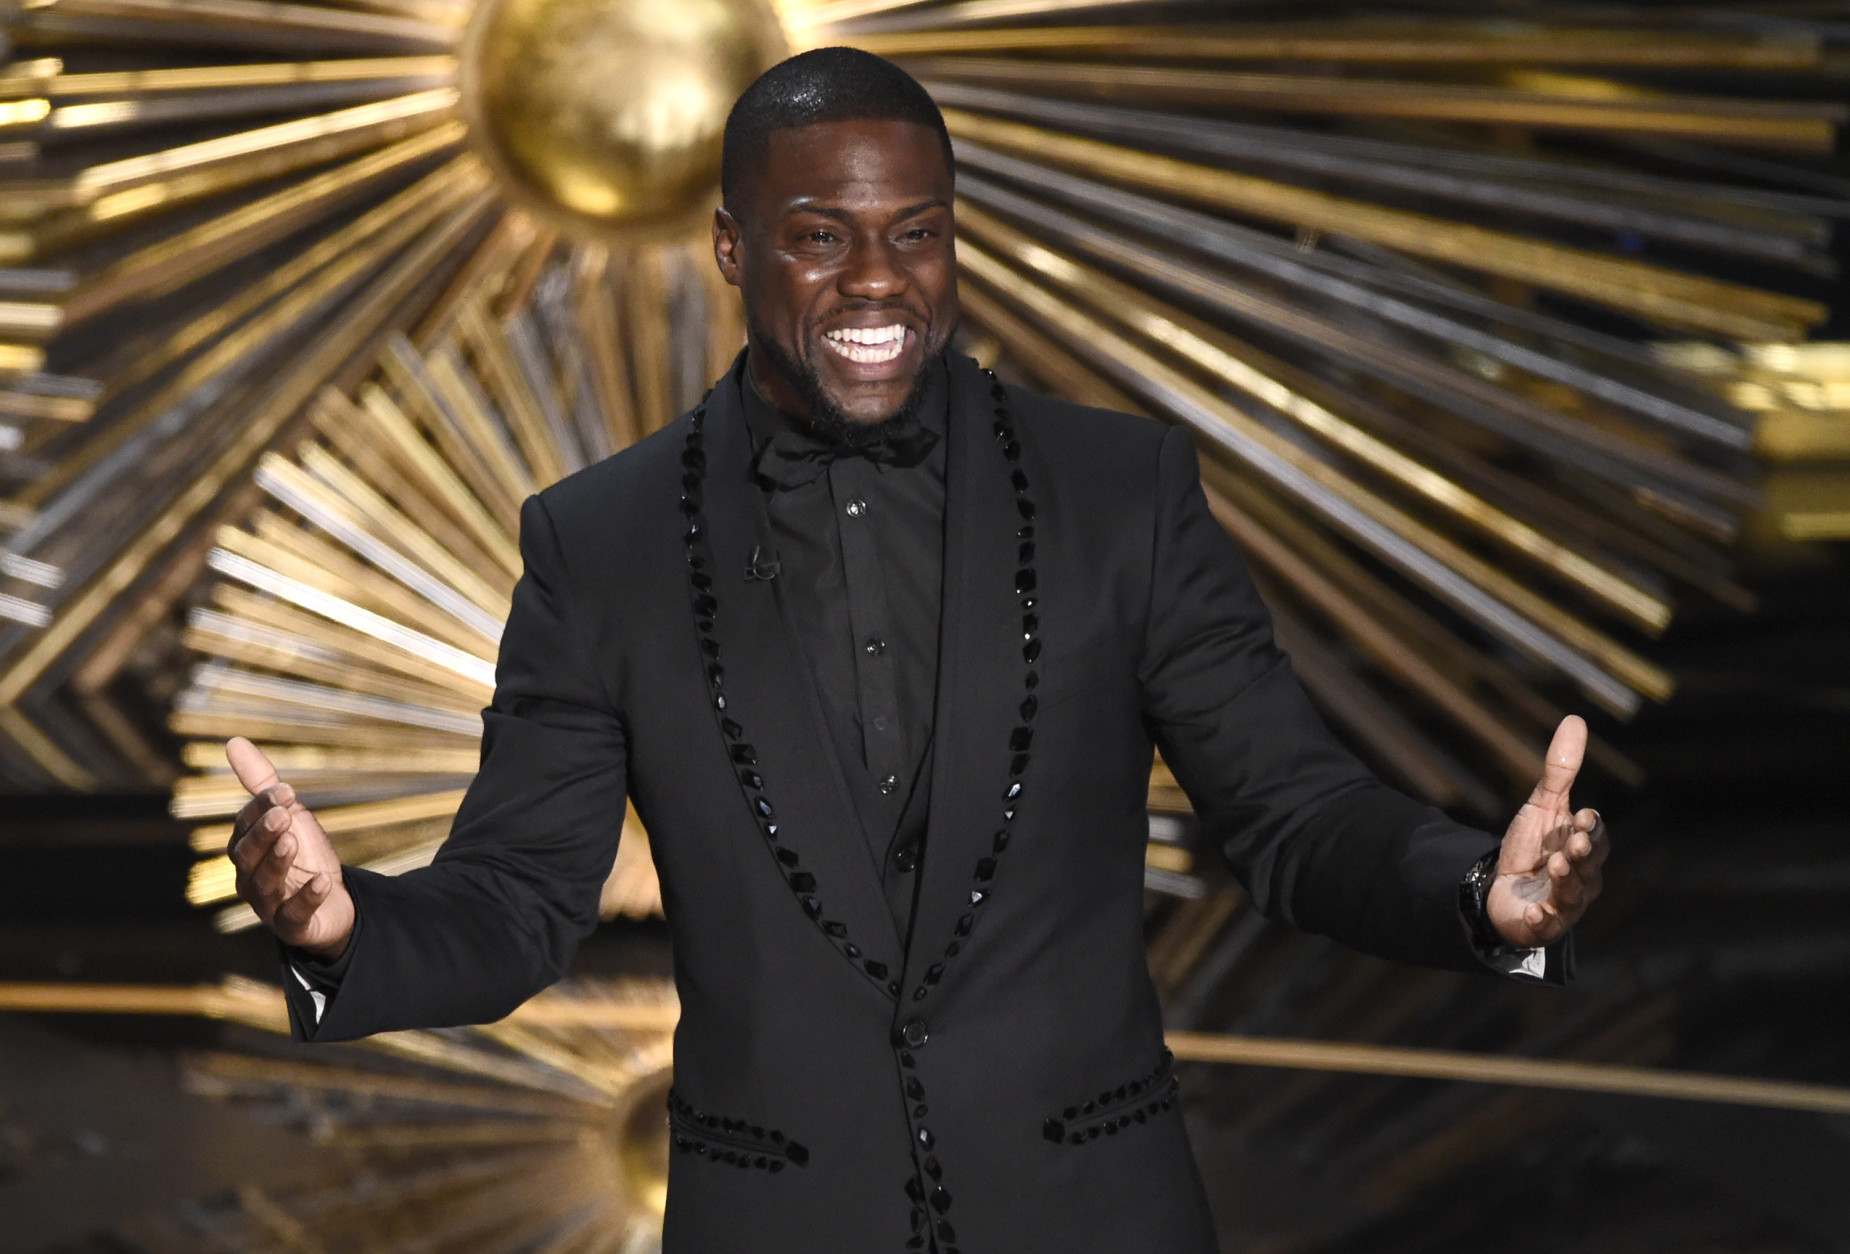 FILE- In this Feb. 28, 2016, file photo, Kevin Hart speaks at the Oscars at the Dolby Theatre in Los Angeles. Atria Publishing Group announced Tuesday, March 22, 2016, that Hart will release a memoir, From the Hart, about his early life and failures that gave him the motivation to become one a Hollywood star. (Photo by Chris Pizzello/Invision/AP, File)